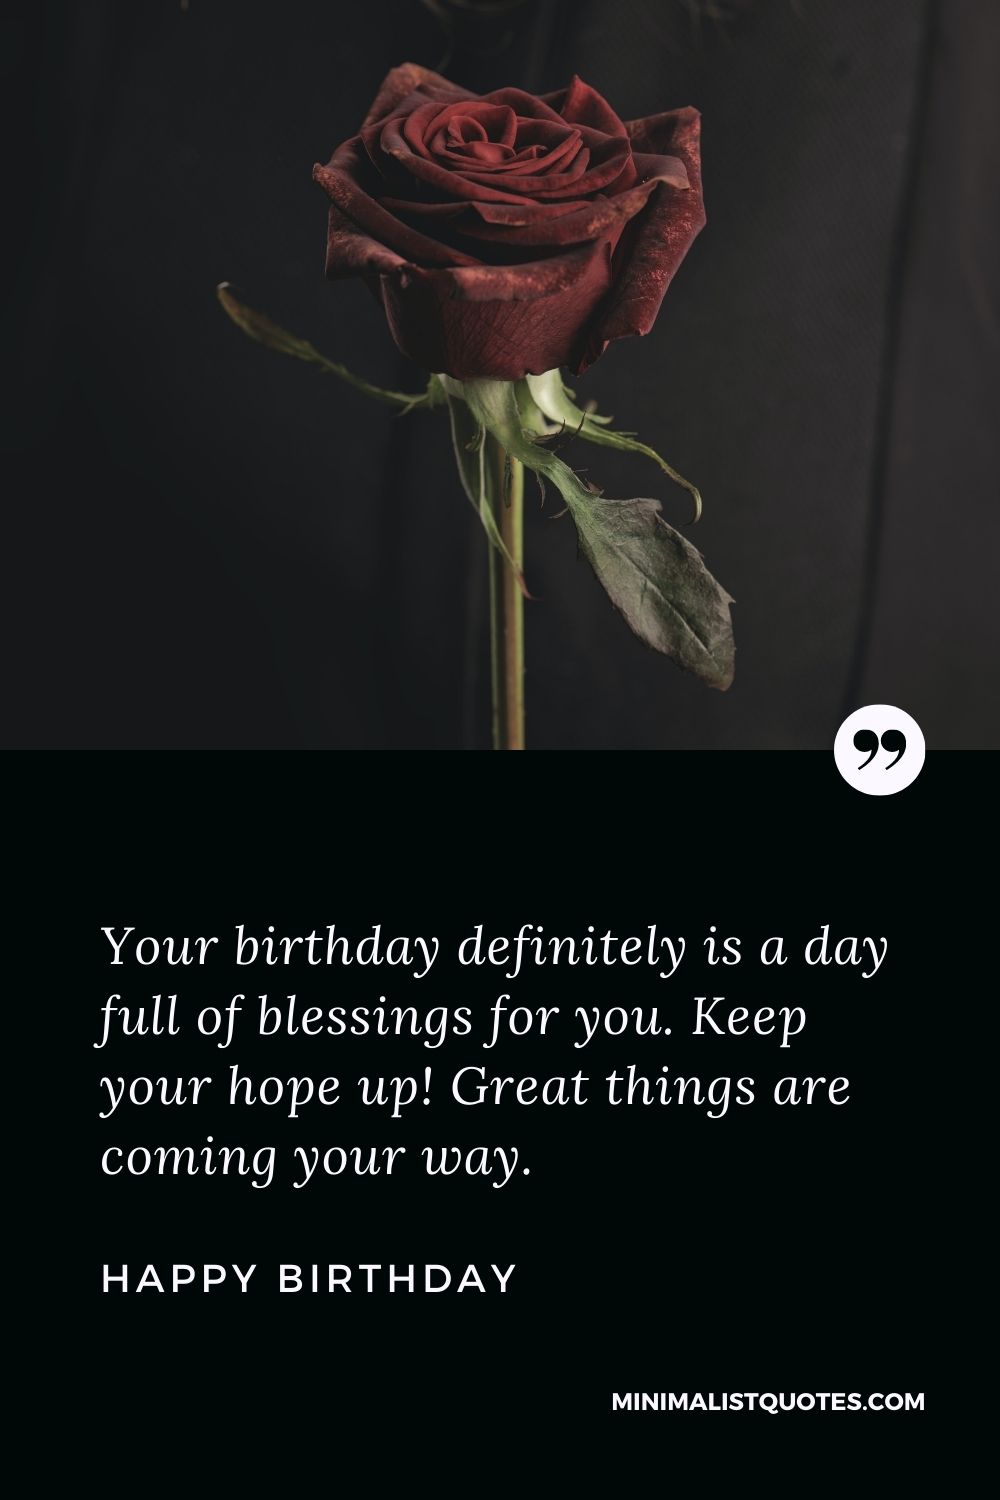 Birthday Wish & Message with HD Image: Your birthday definitely is a day full of blessings for you. Keep your hope up! Great things are coming your way. Happy Birthday!